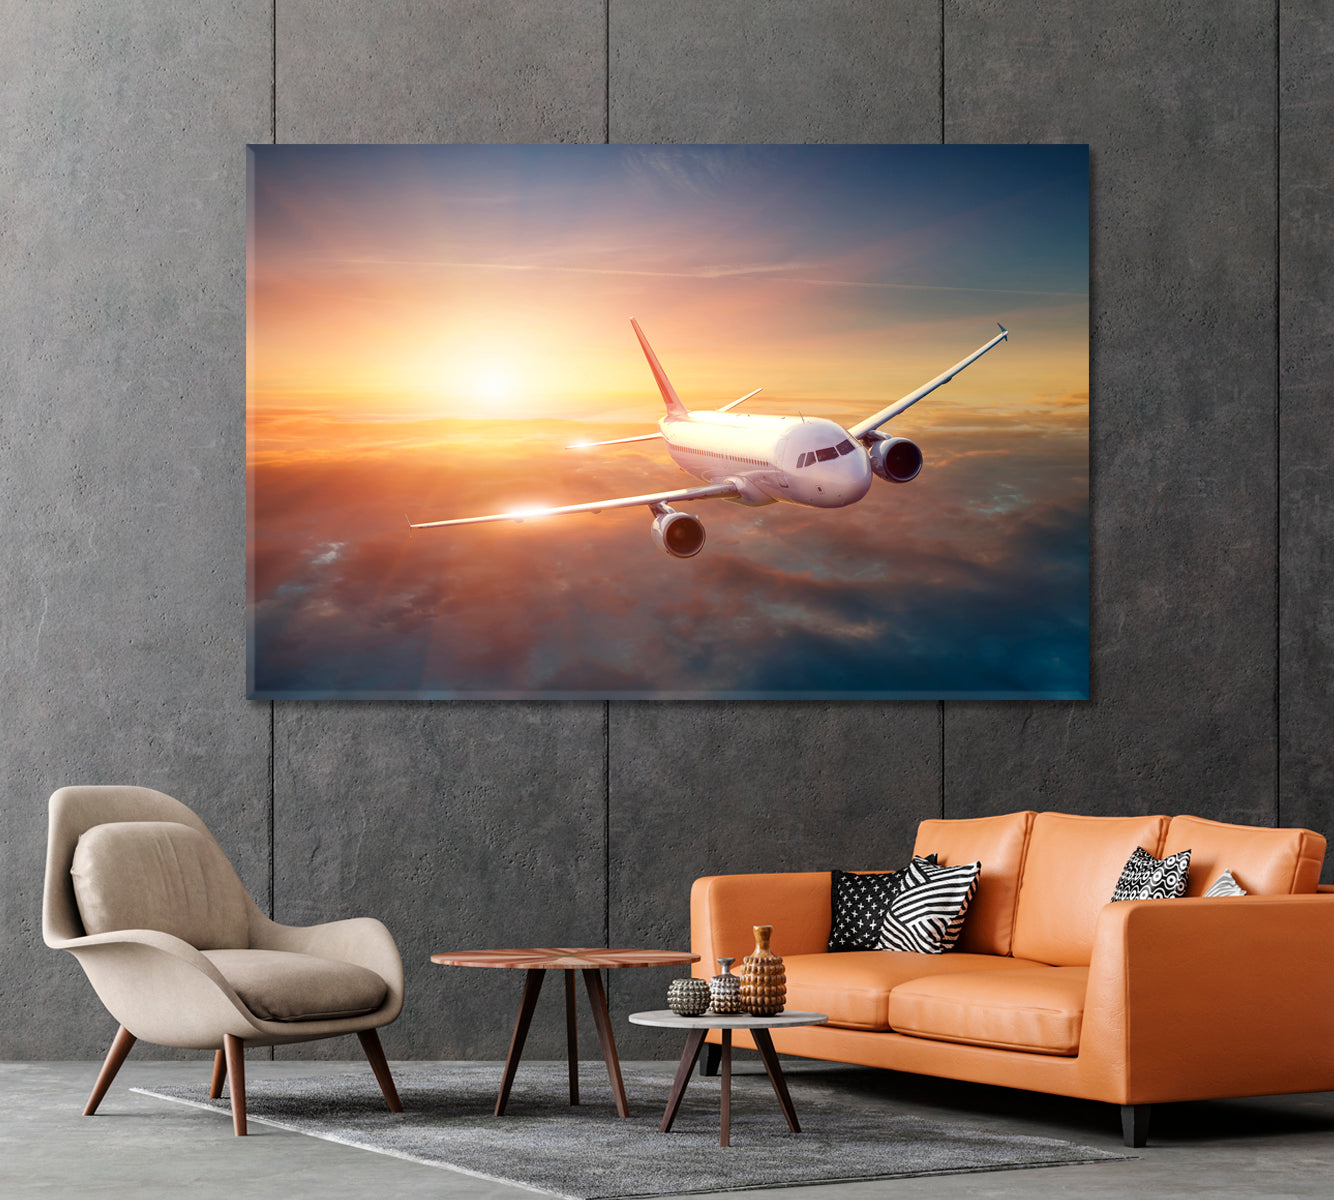 Airplane in Sky at Sunset Canvas Print-Canvas Print-CetArt-1 Panel-24x16 inches-CetArt